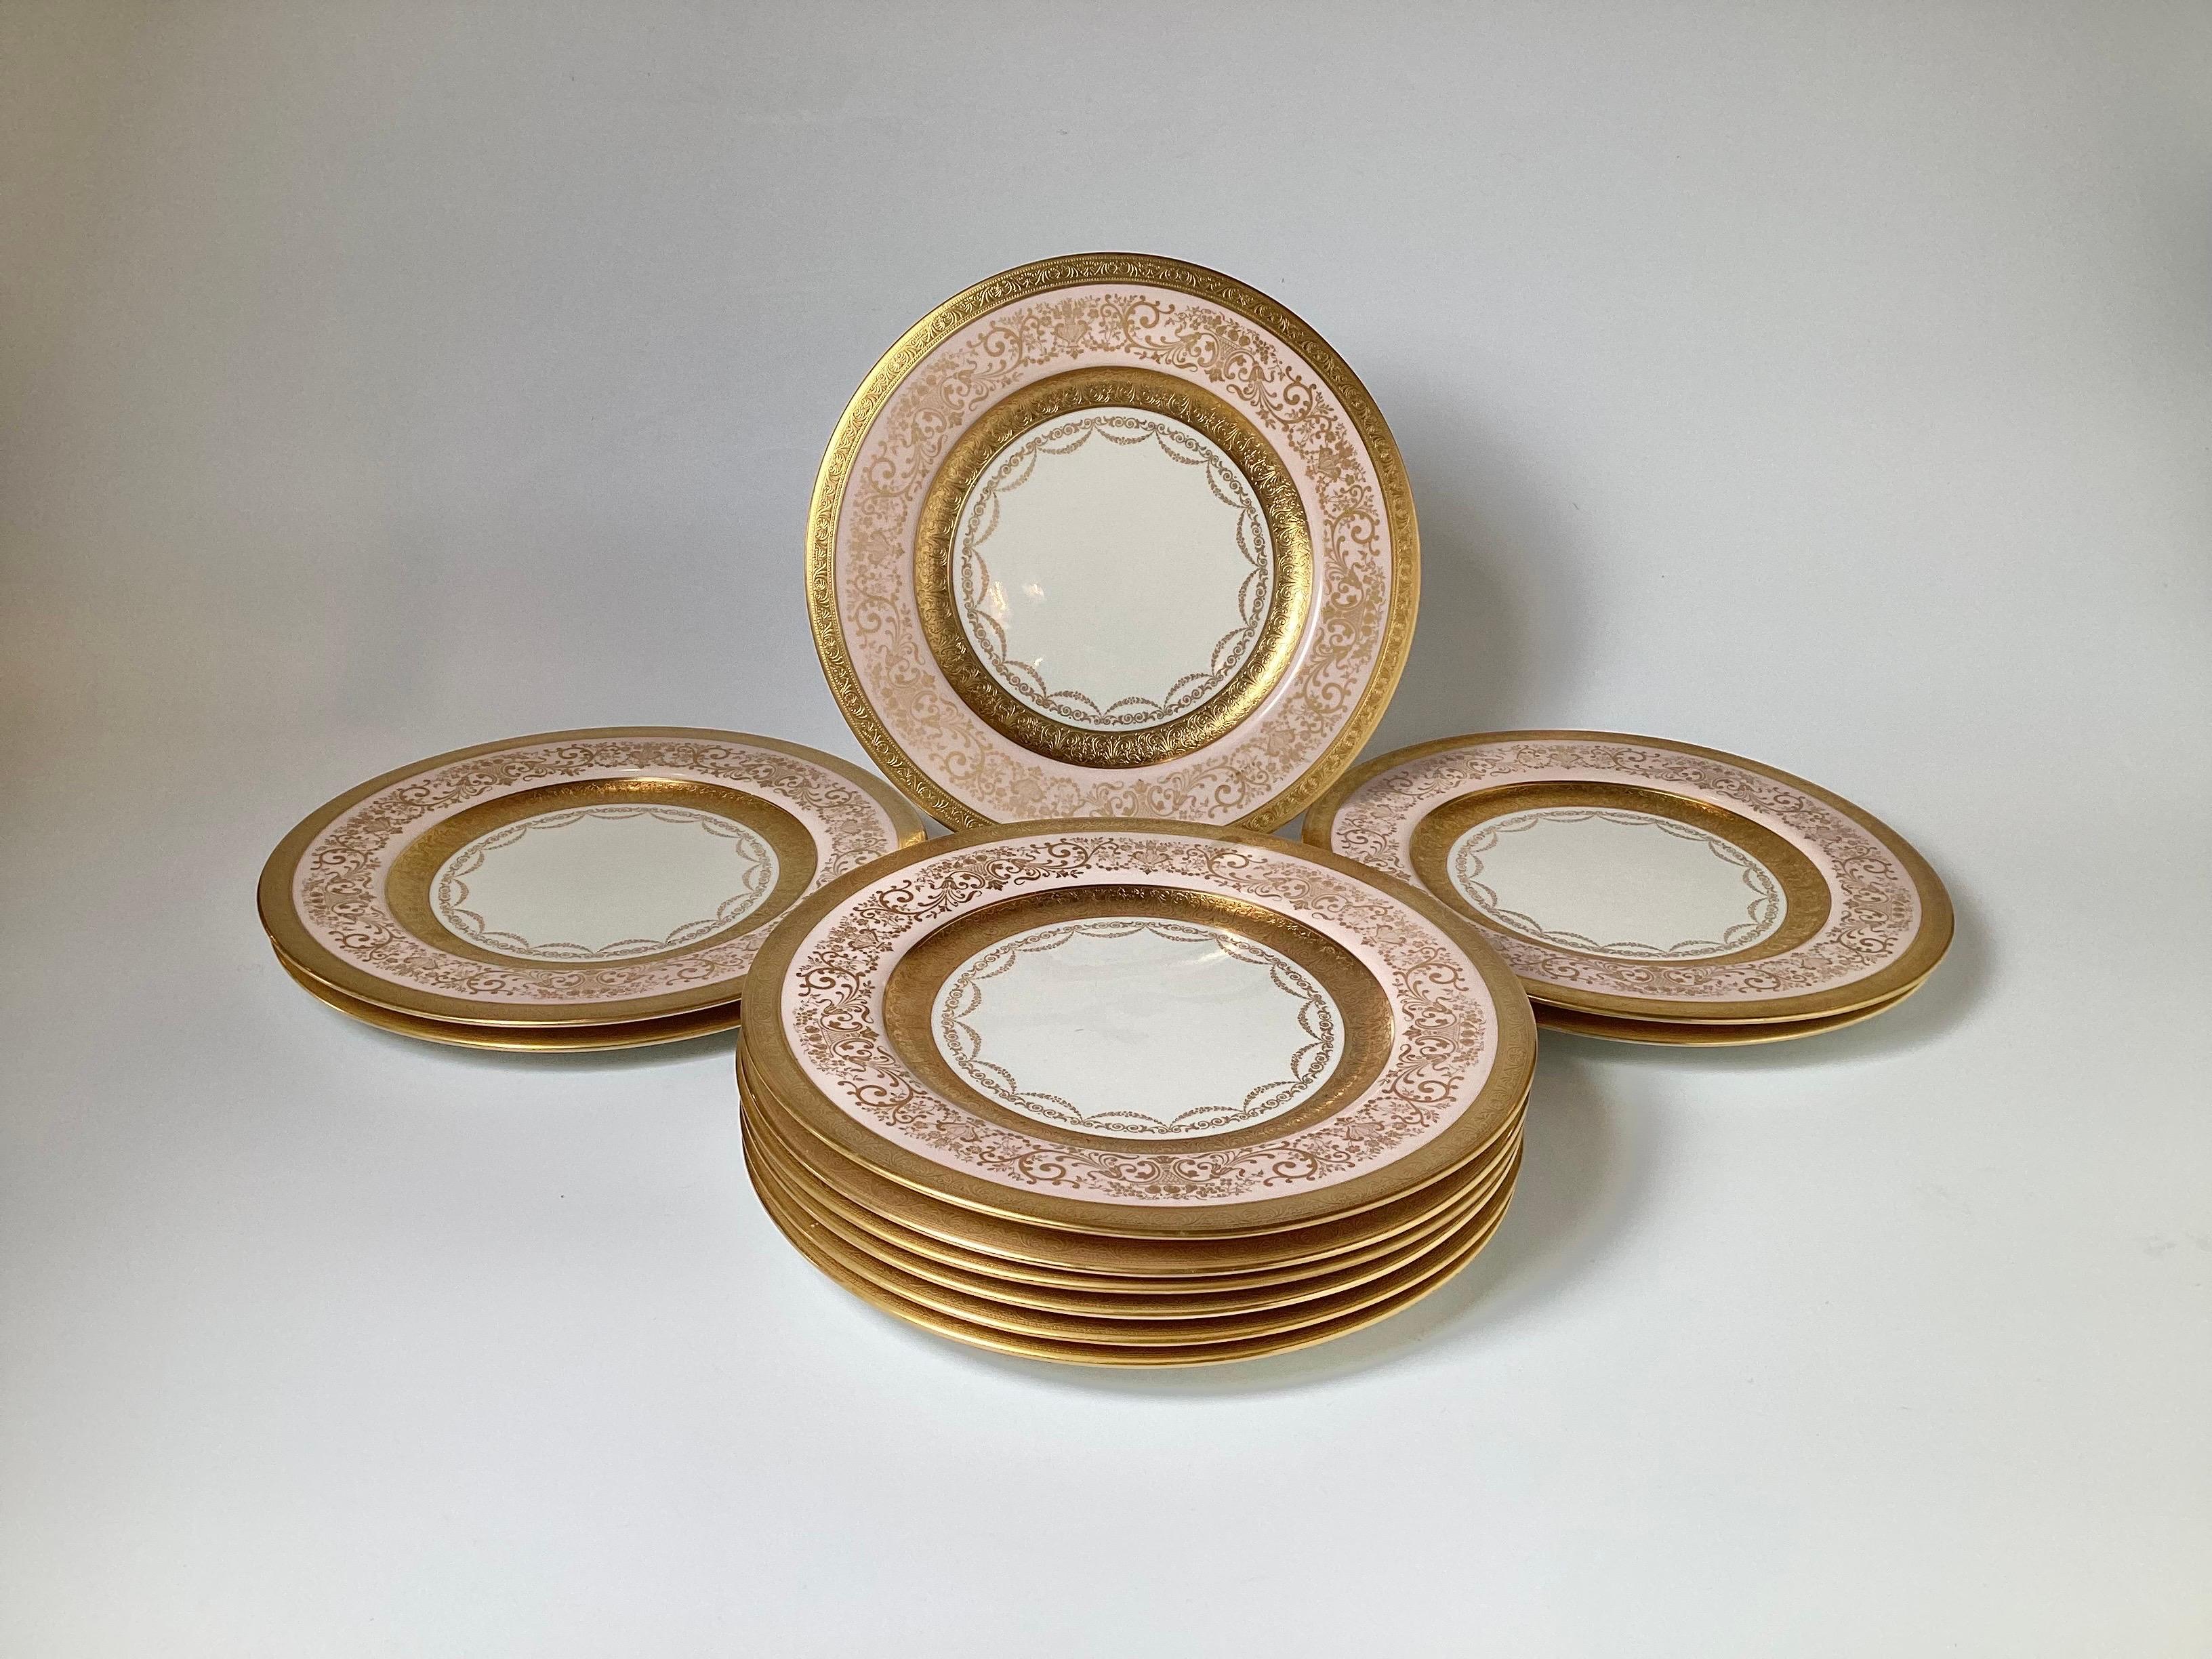 Elegant and formal gold decorated service plates with a pale pink border. The broad pink border with inner and outer gold band with gold scrolling detail with a swaged ring around the center white surface. These are beautiful plates with soft